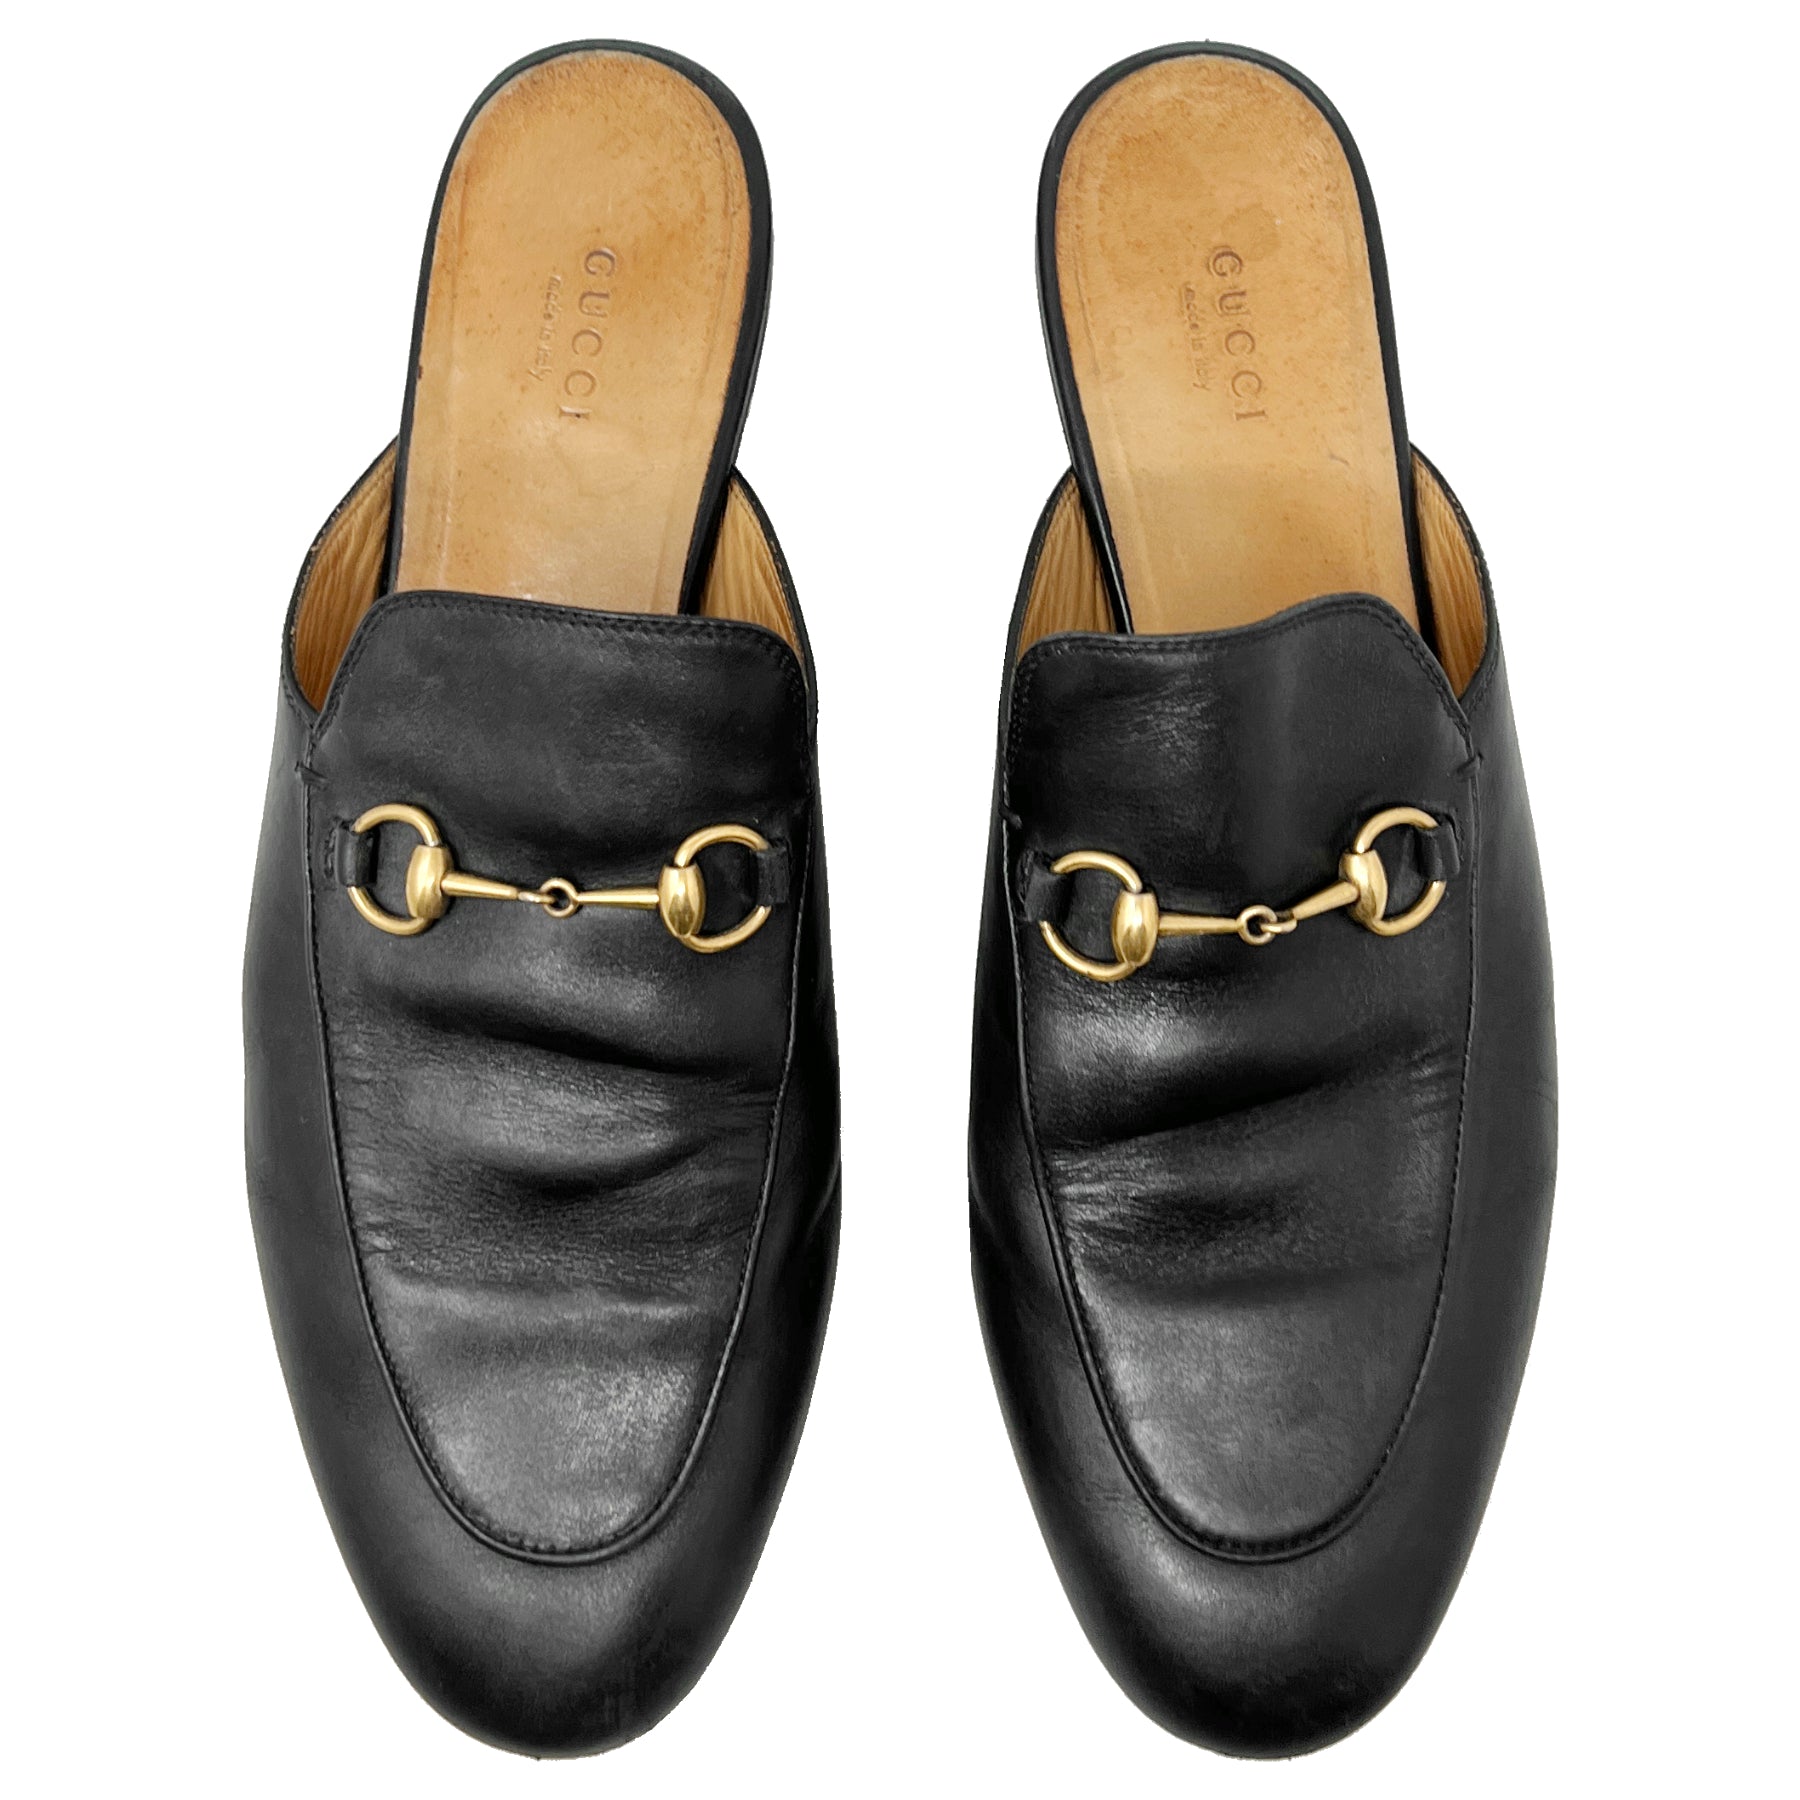 Gucci Princetown Horsebit Black Leather Round Toe Loafer Mules Slip On Flats